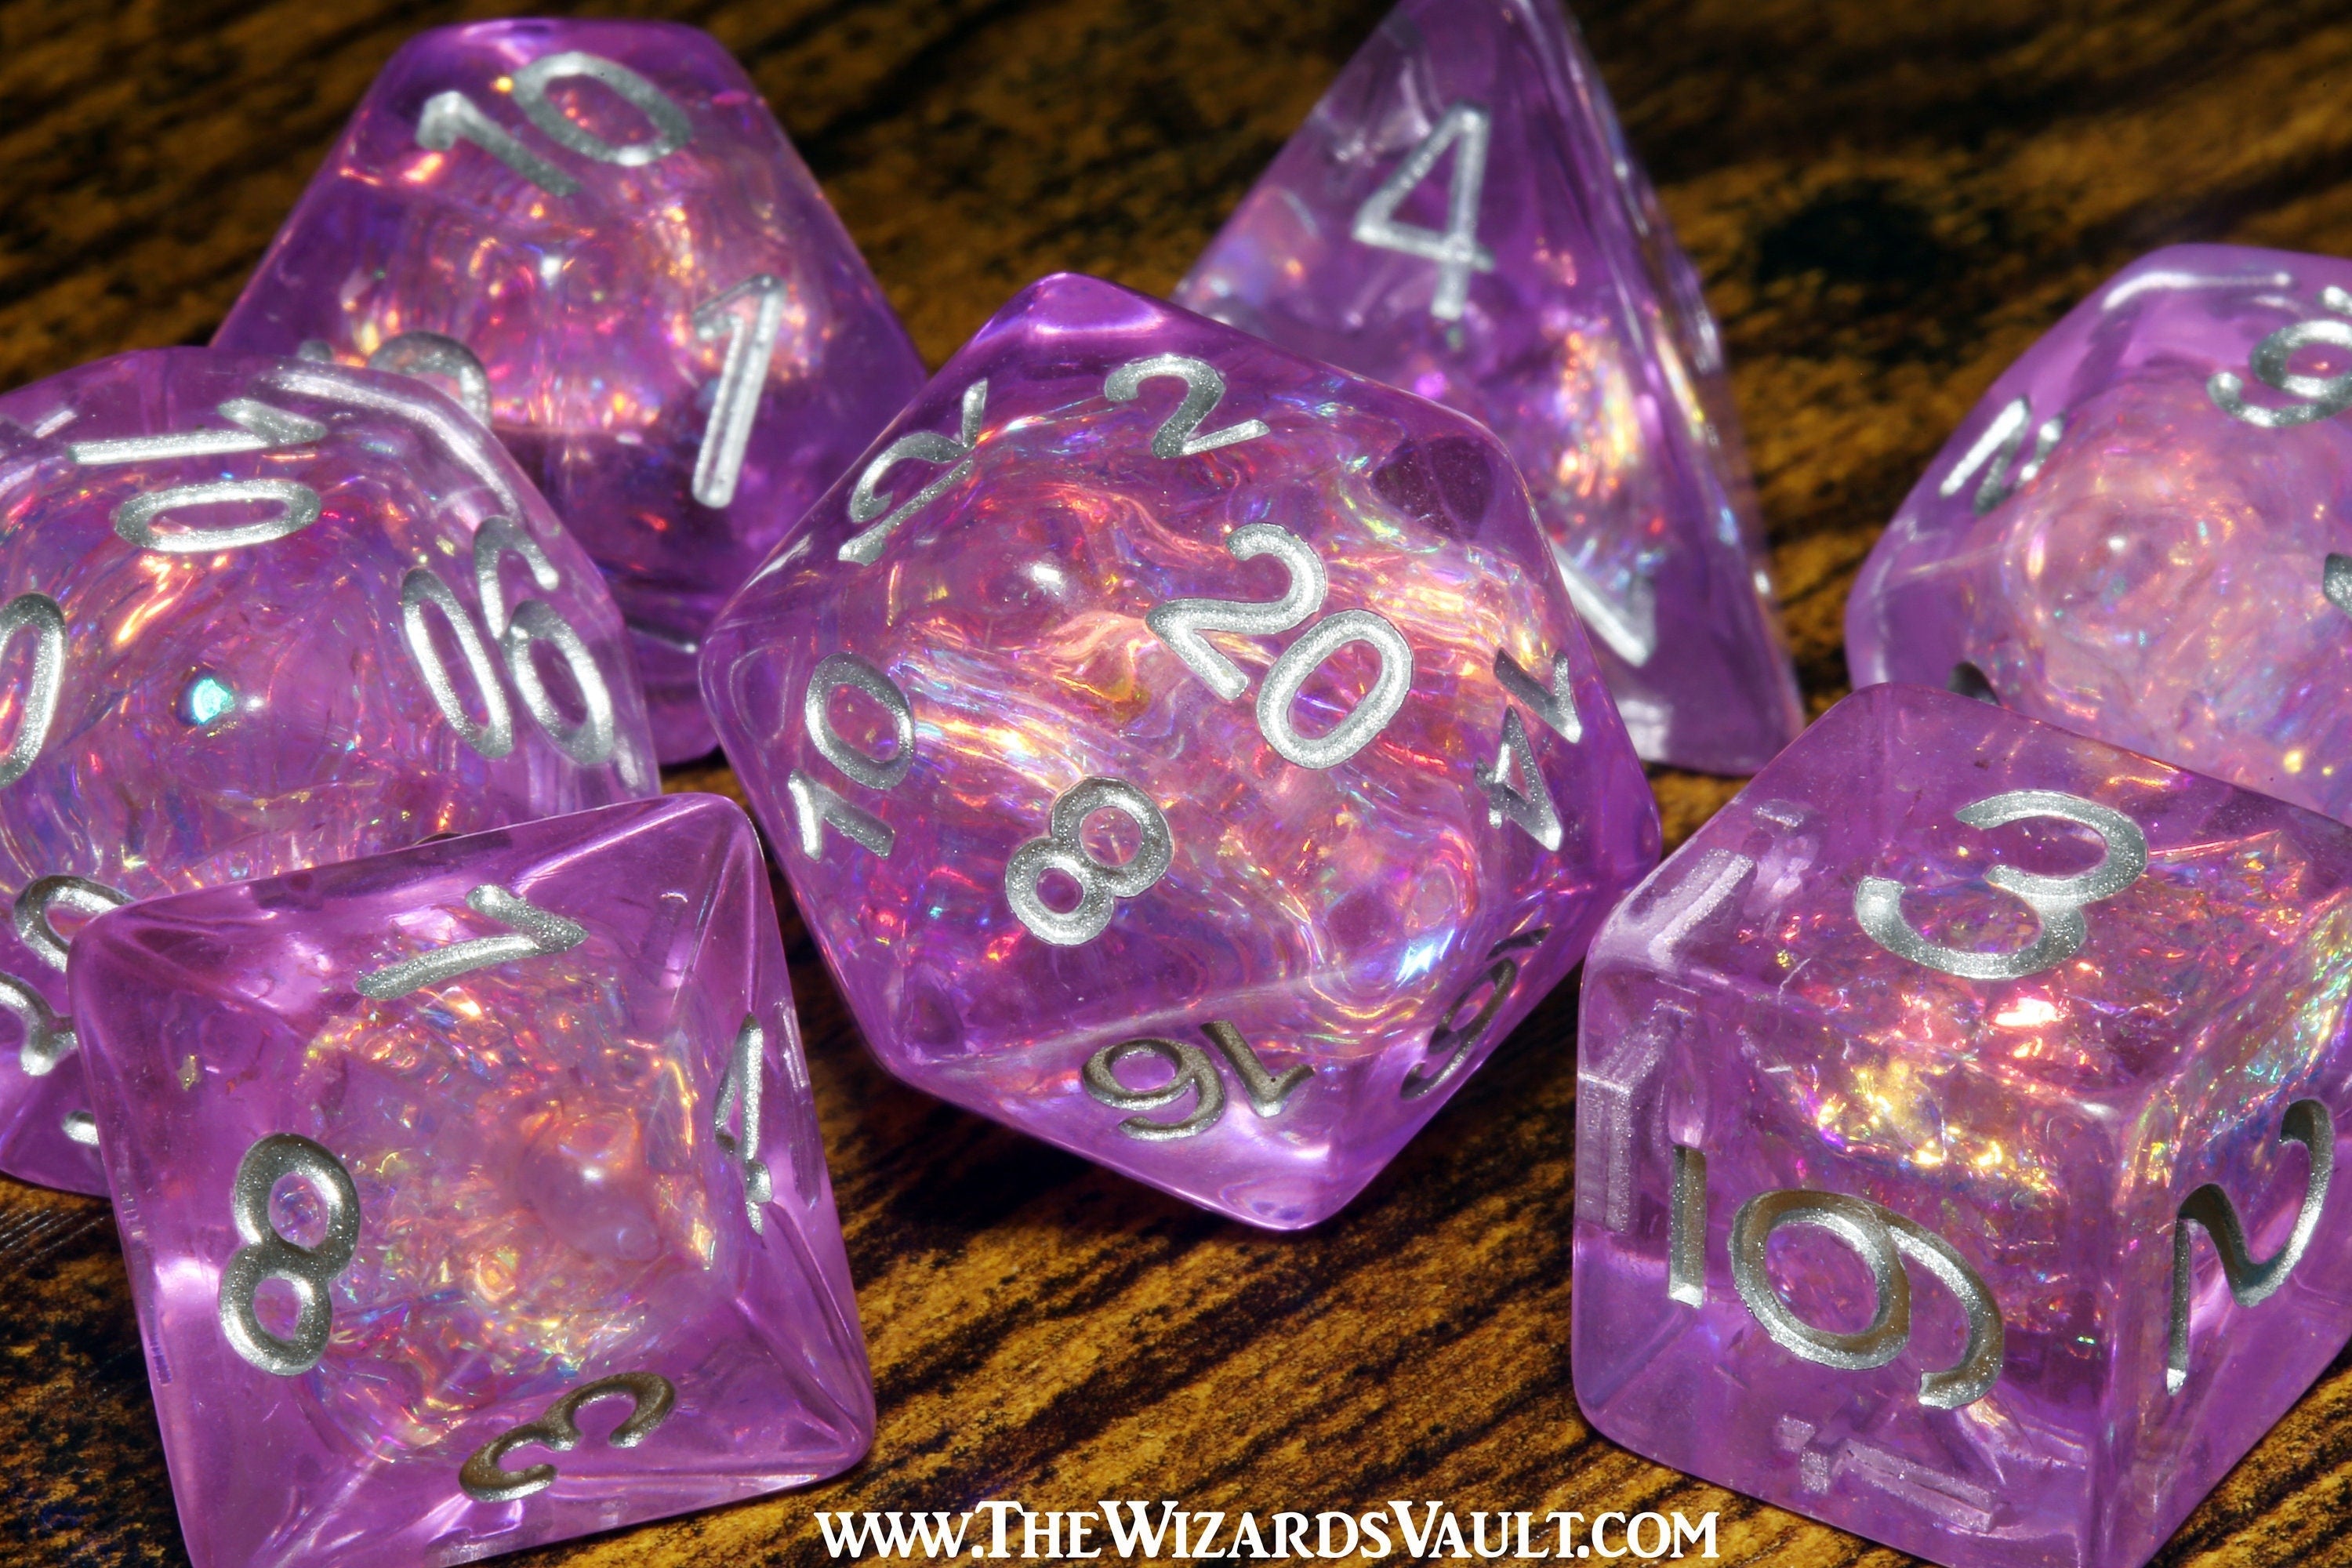 Purple dice set with Holographic inclusions DND Dice, Transparent violet with holo glitter , Role Playing games Dice storage, D&D Dice - The Wizard's Vault